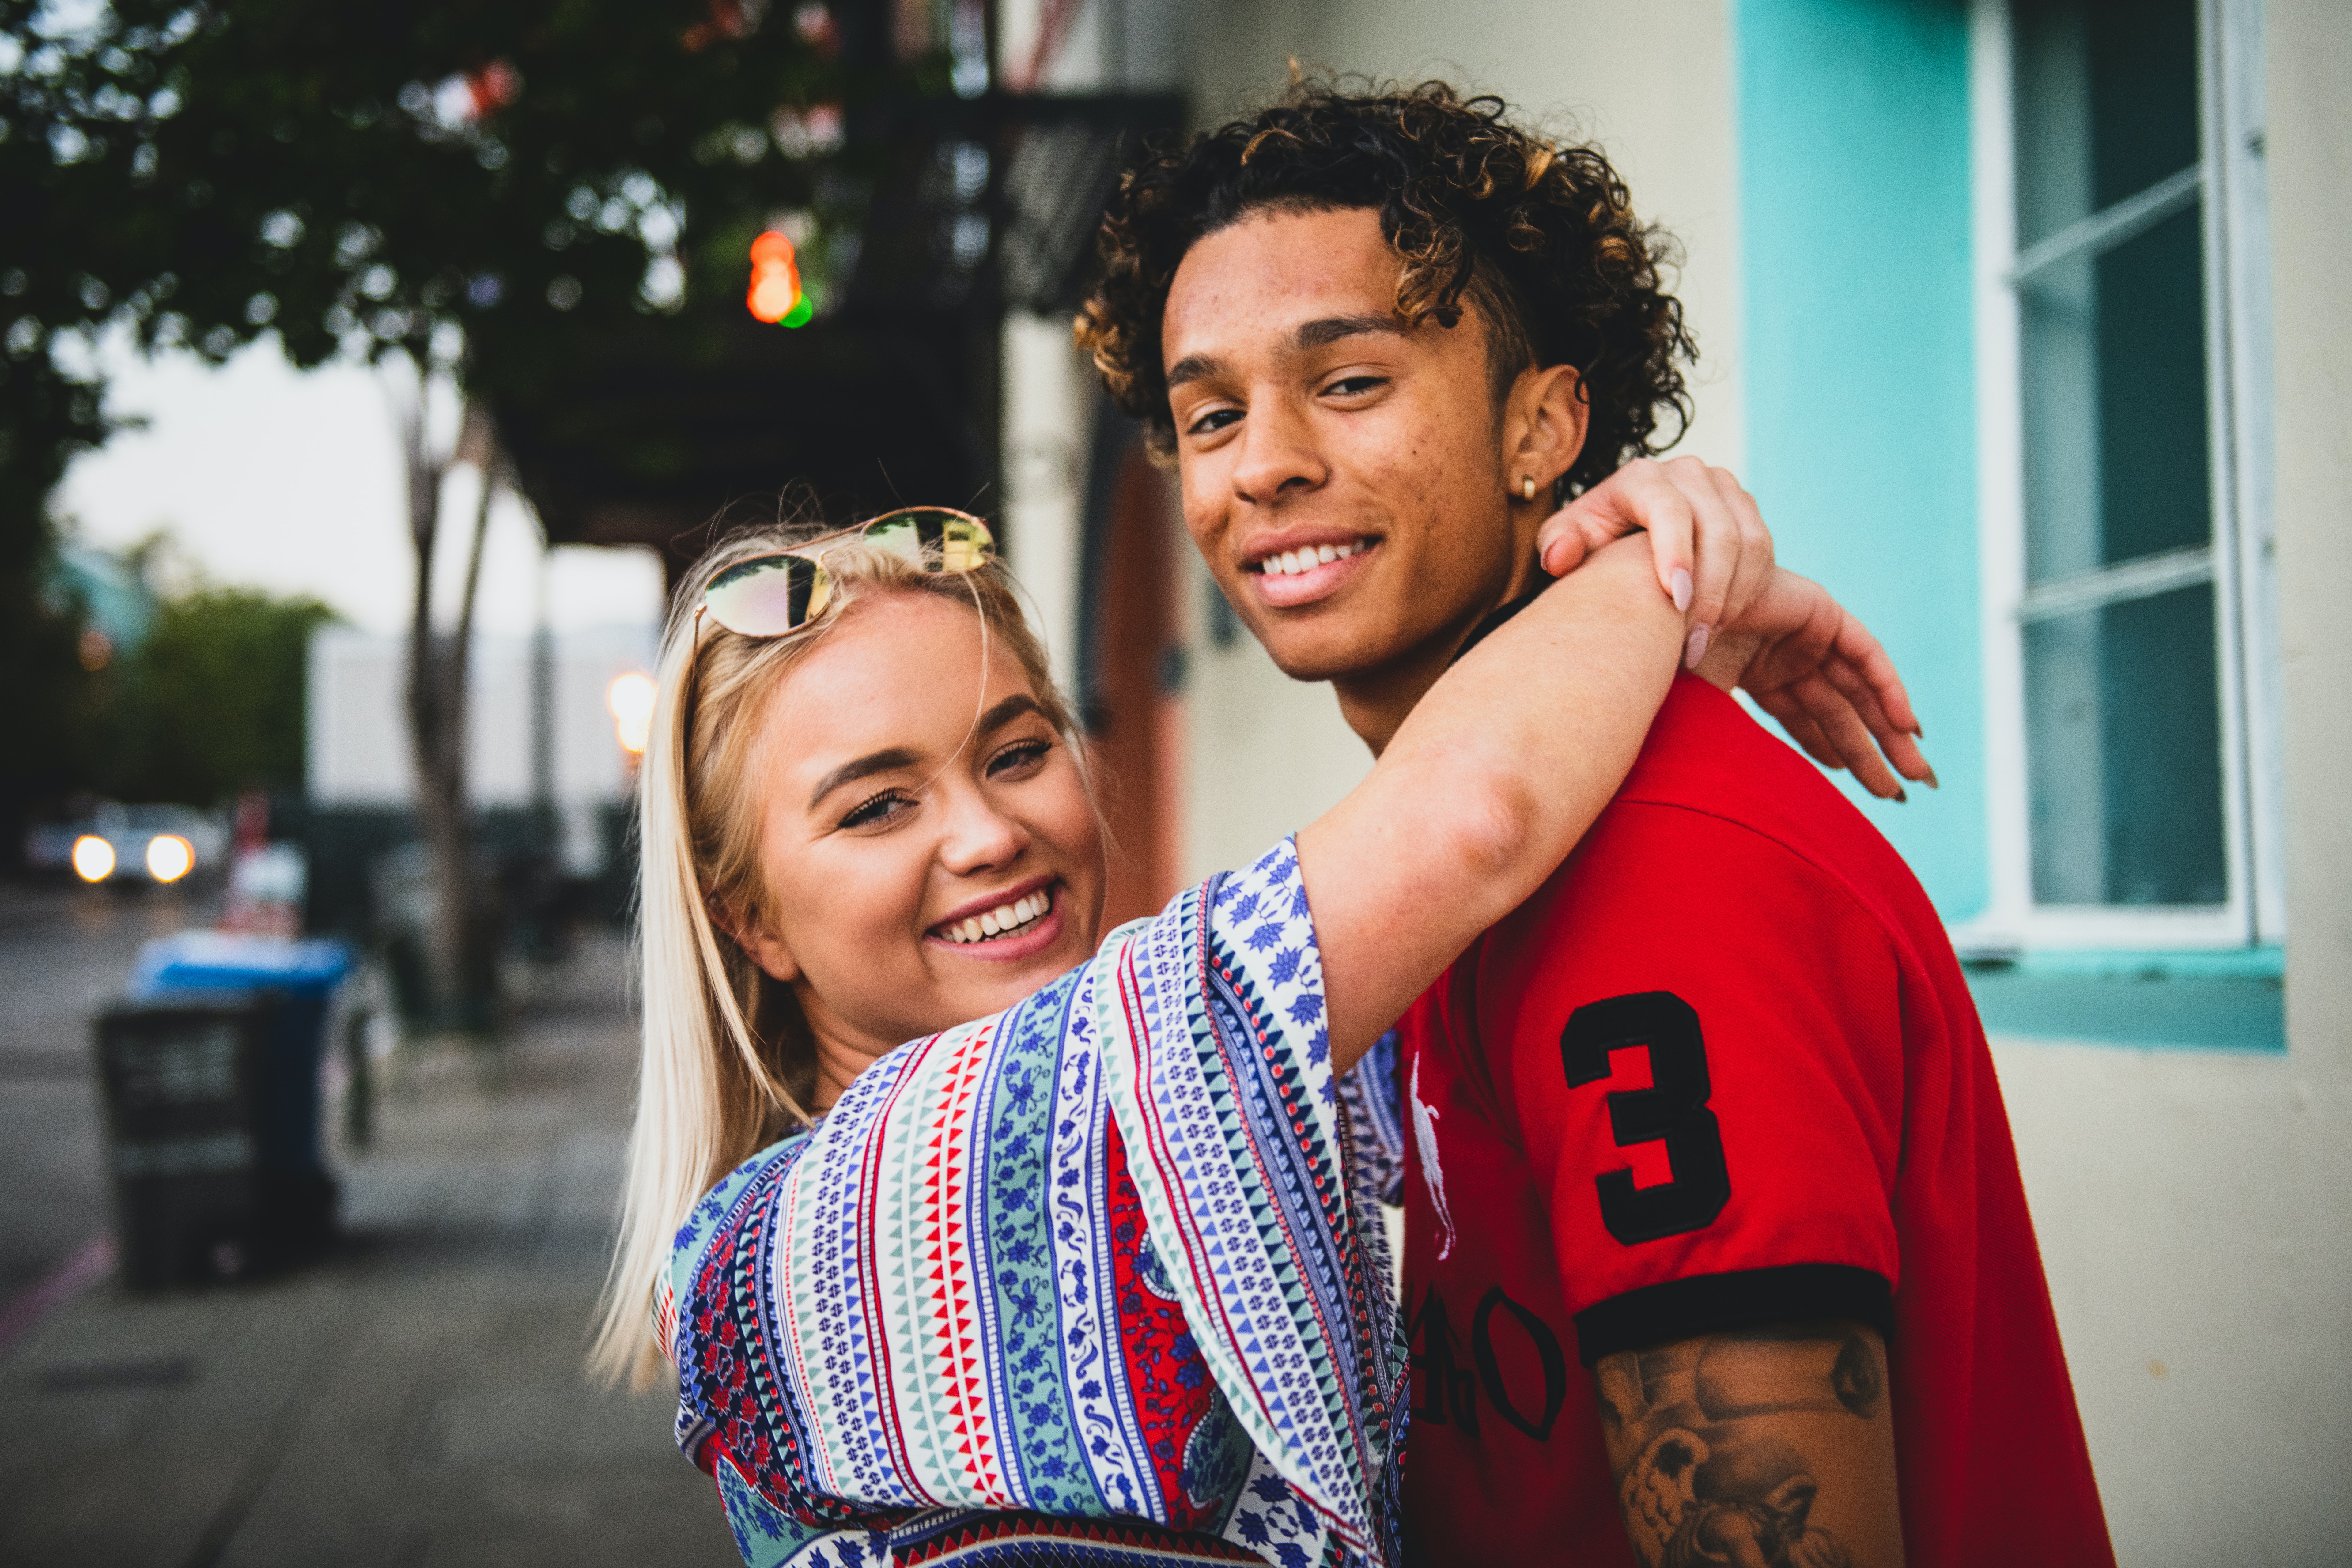 Image of a blond haired woman wearing a summer dress and an attractive mutliracial young man wearing a polo shirt. Both are holding eachother and smiling looking at the camera in the street.